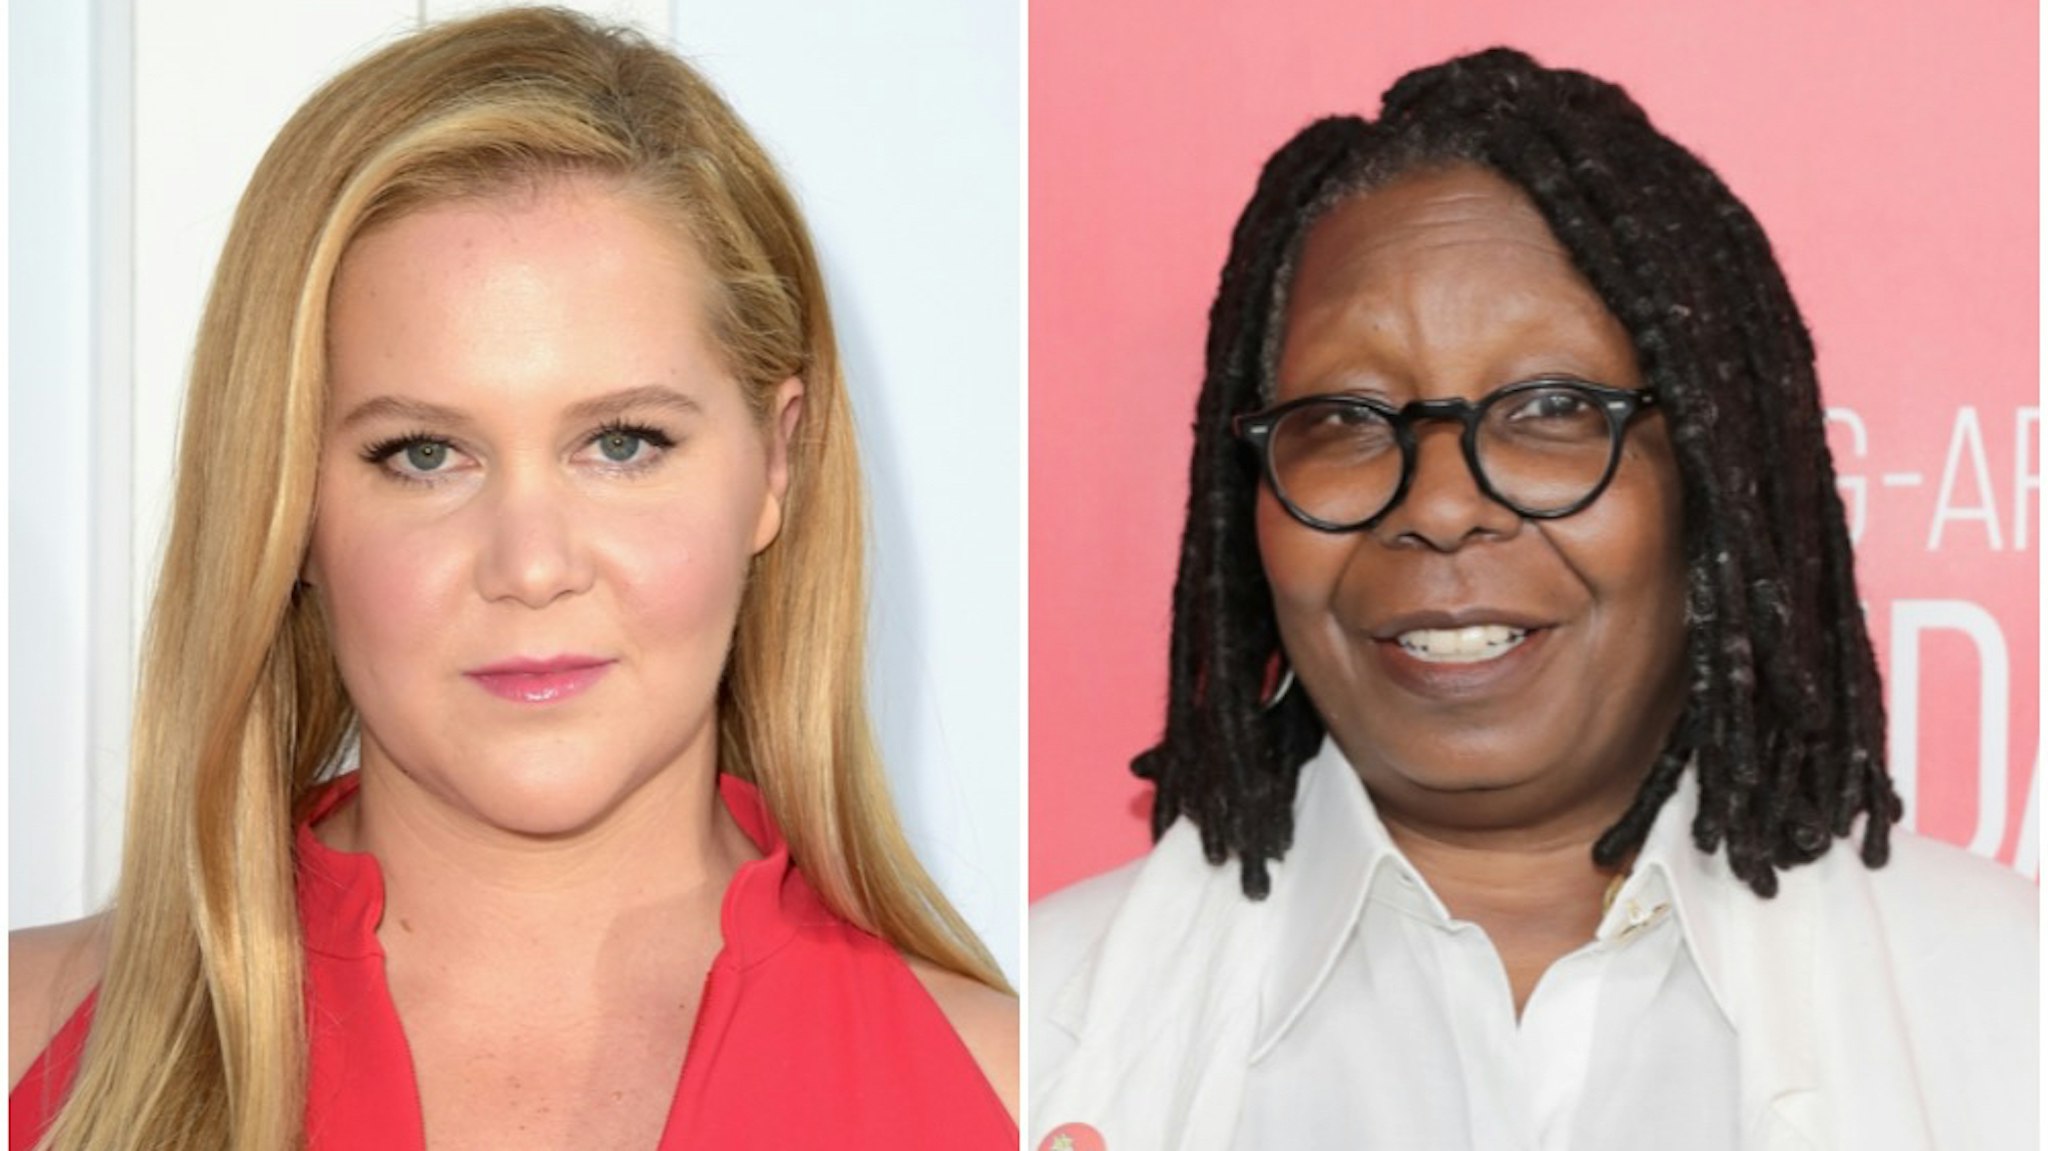 Amy Schumer, Whoopi Goldberg (Photo by Kevin Winter/Getty Images/Photo by Neilson Barnard/Getty Images)